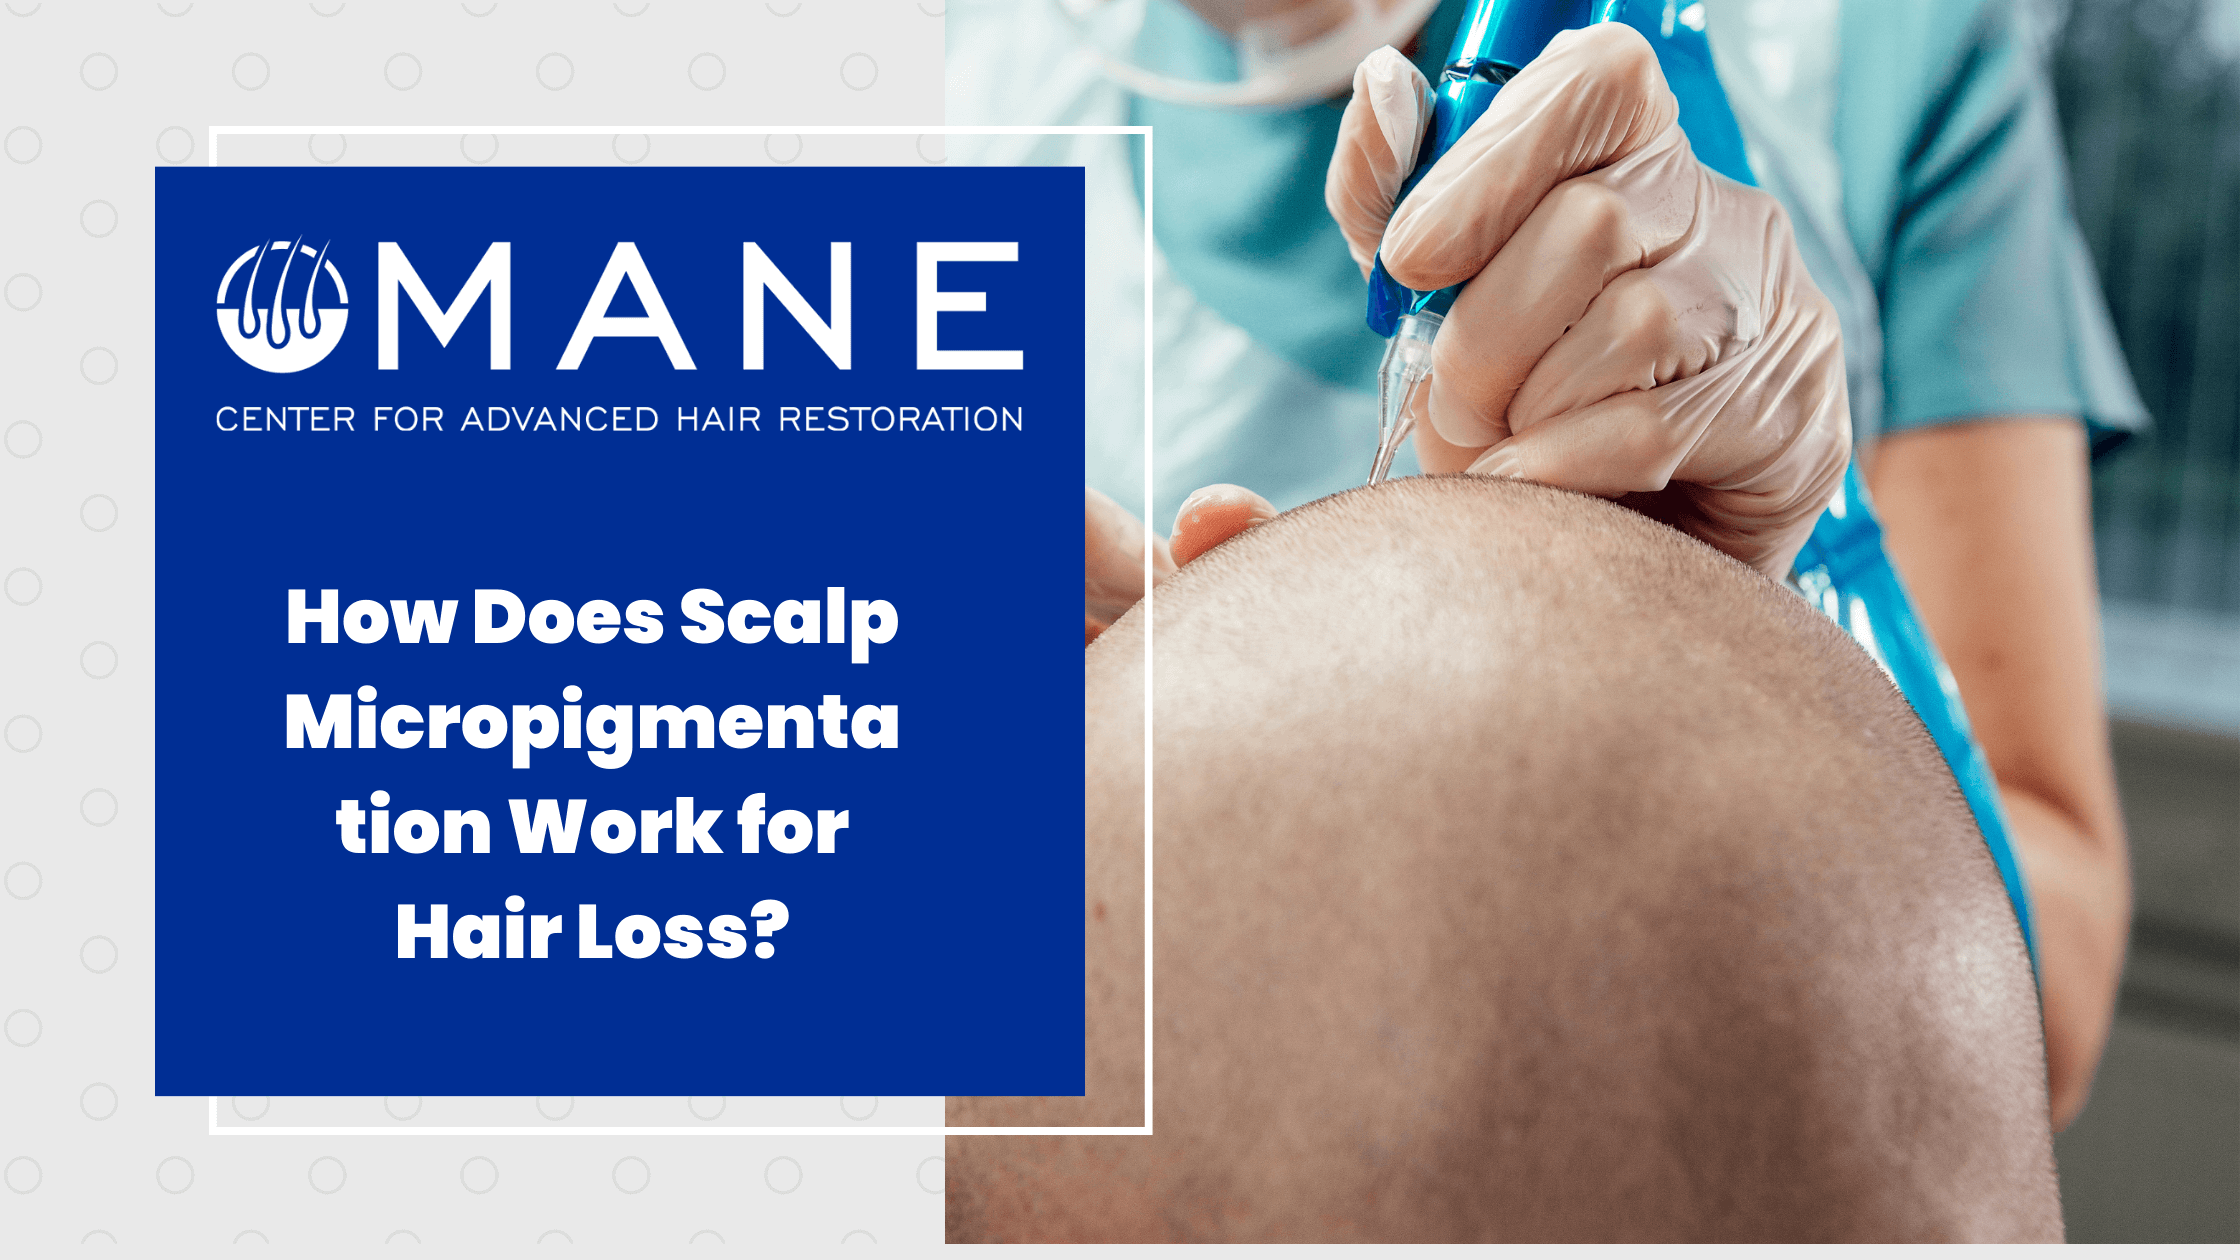 How Does Scalp Micropigmentation Work for Hair Loss?